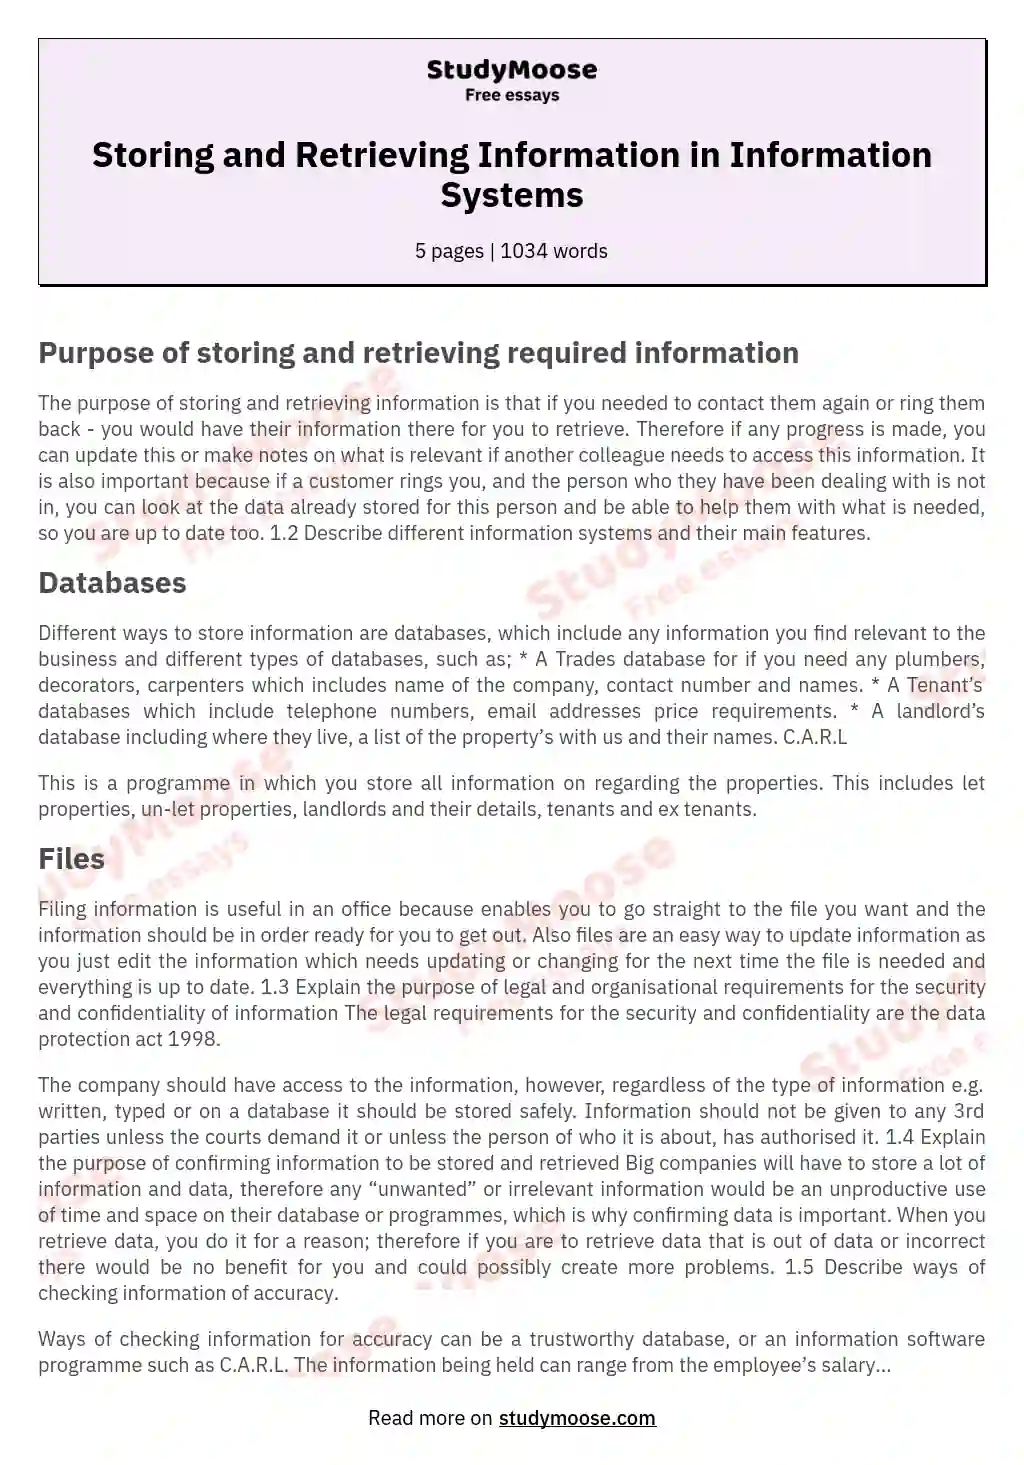 Storing and Retrieving Information in Information Systems